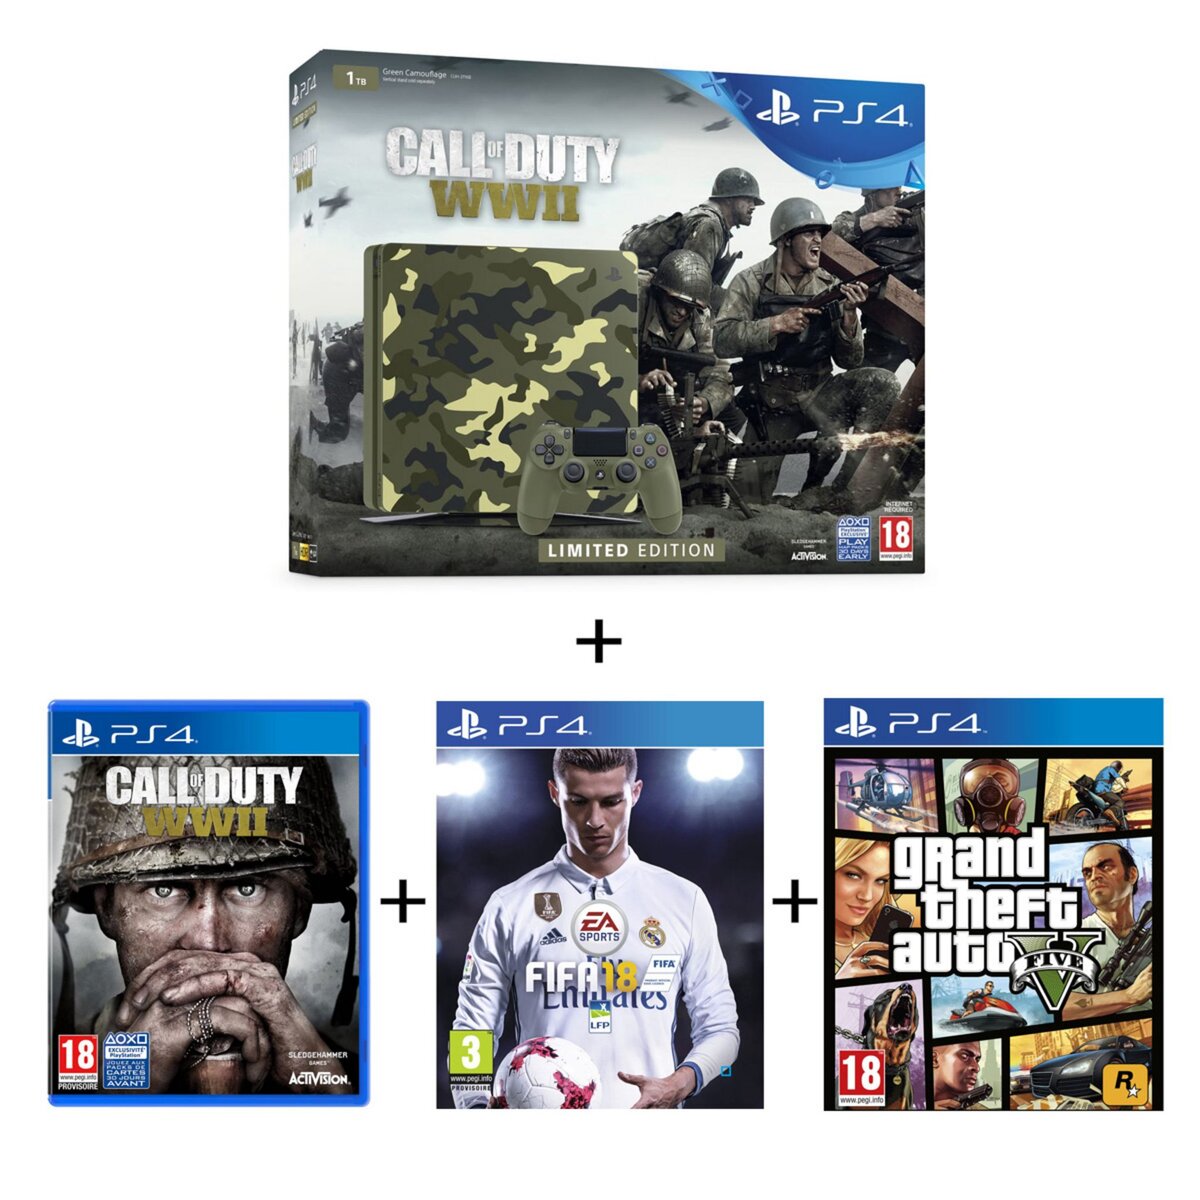 Pack Console Playstation 4 Slim 1To Call of Duty Édition Limitée + FIFA 18 + COD WW 2 + GTA V